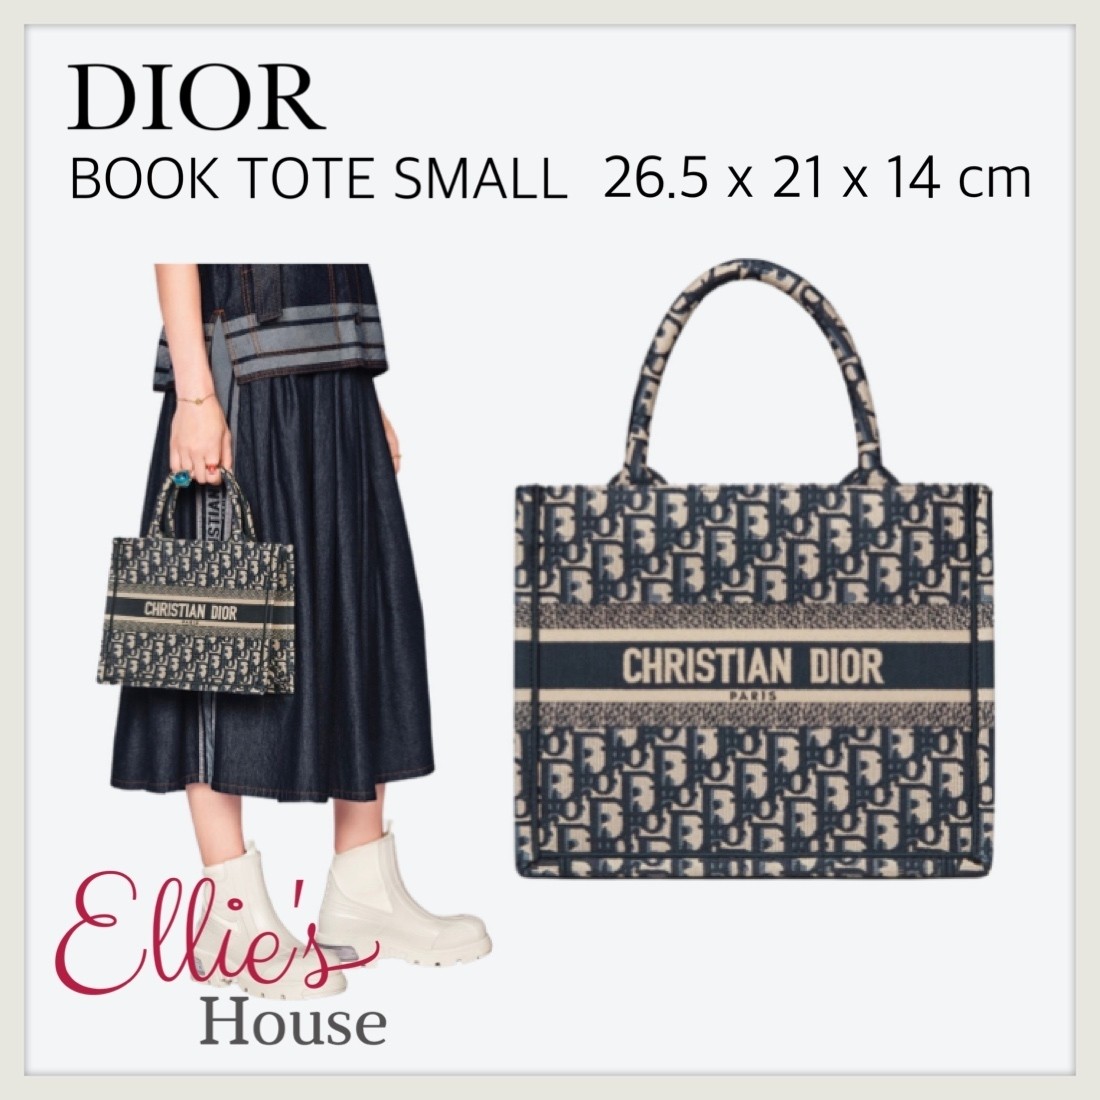 Dior Book Tote has a new small size, with sizes increasing to 4 (2022 latest)-Best Quality Fake designer Bag Review, Replica designer bag ru